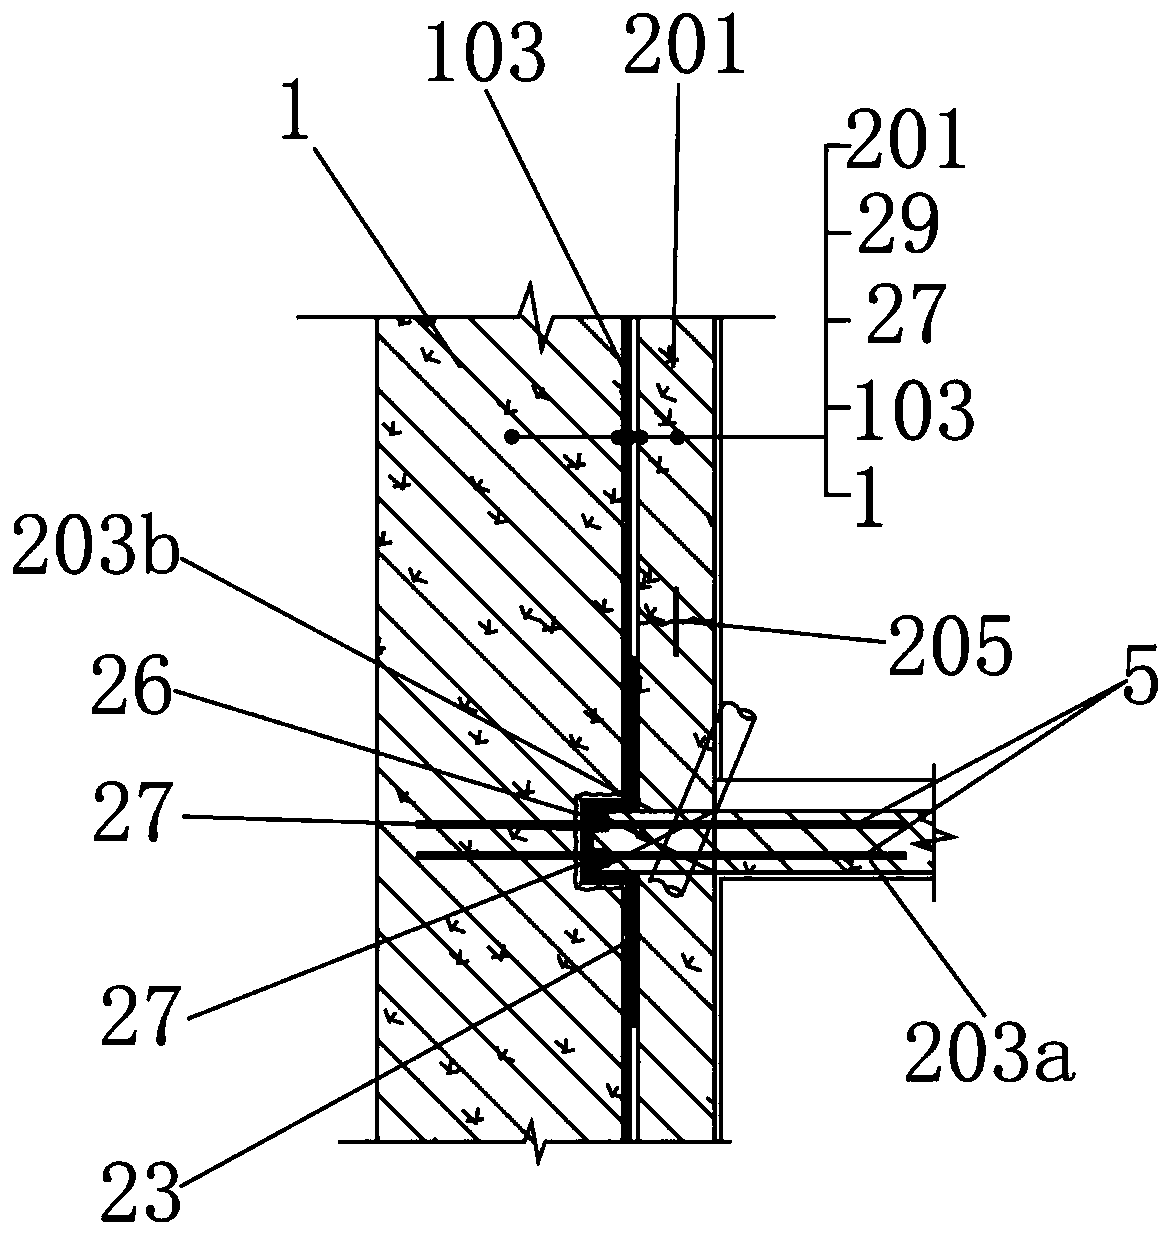 Construction method of basement pile-wall integrated structure system